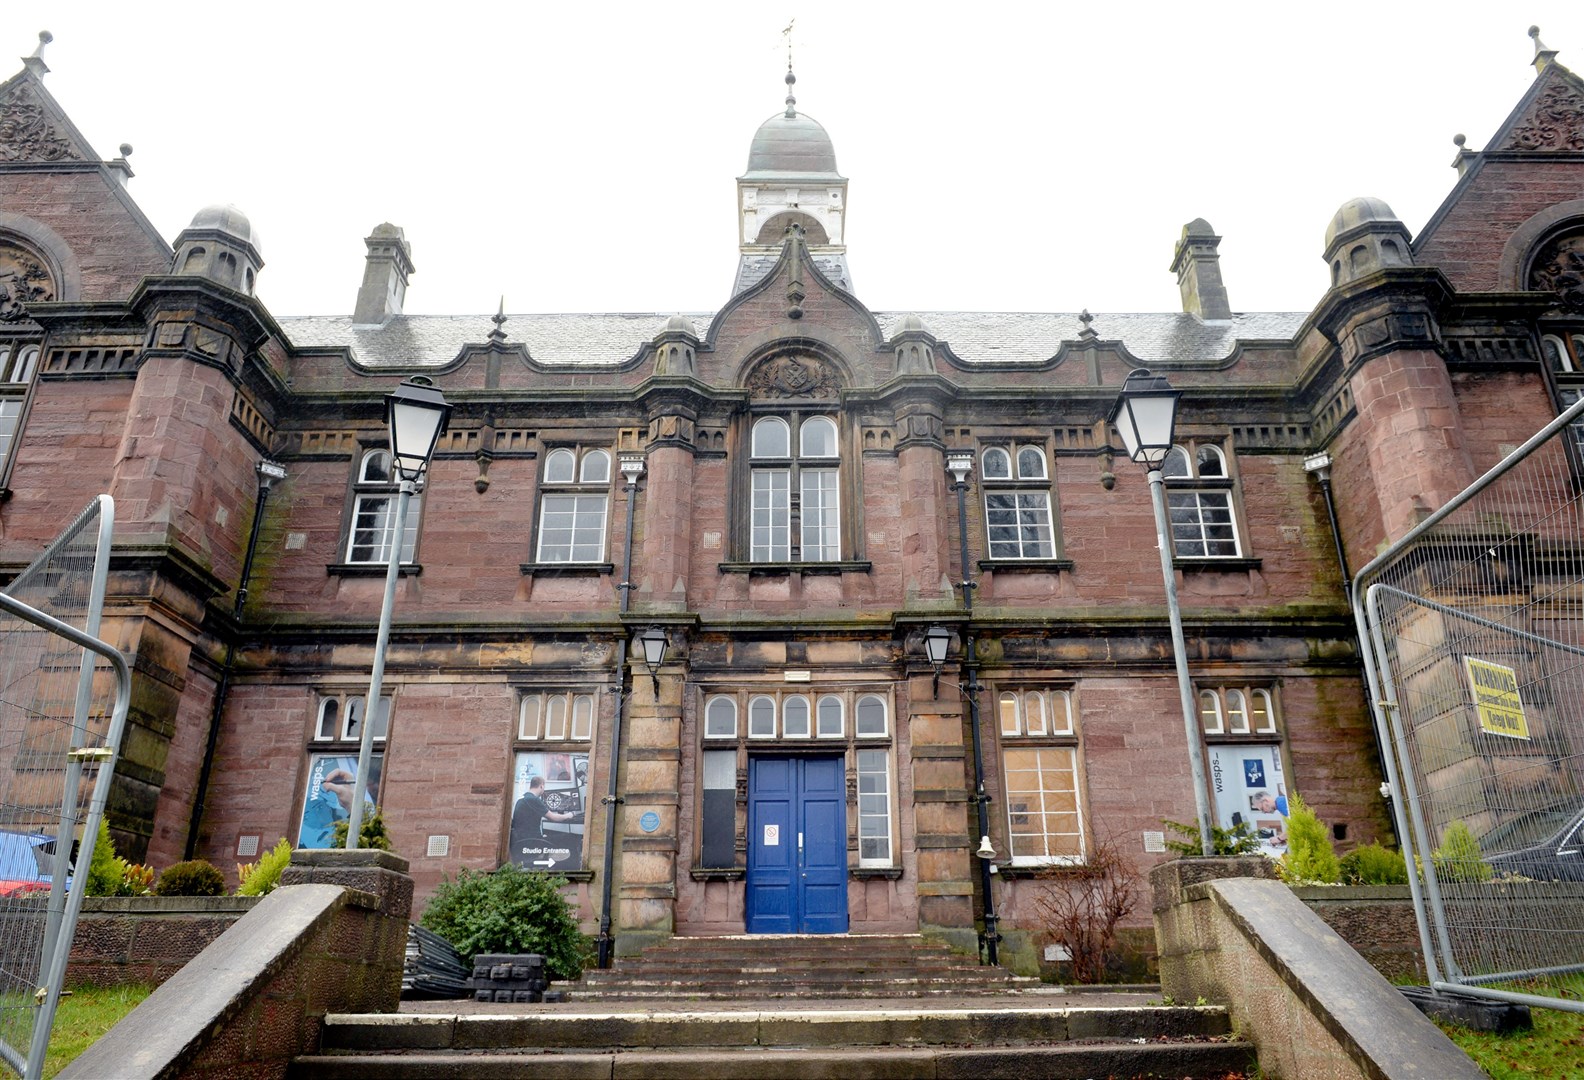 The Midmills Creative Hub in Inverness is among previous successful grant applicants.